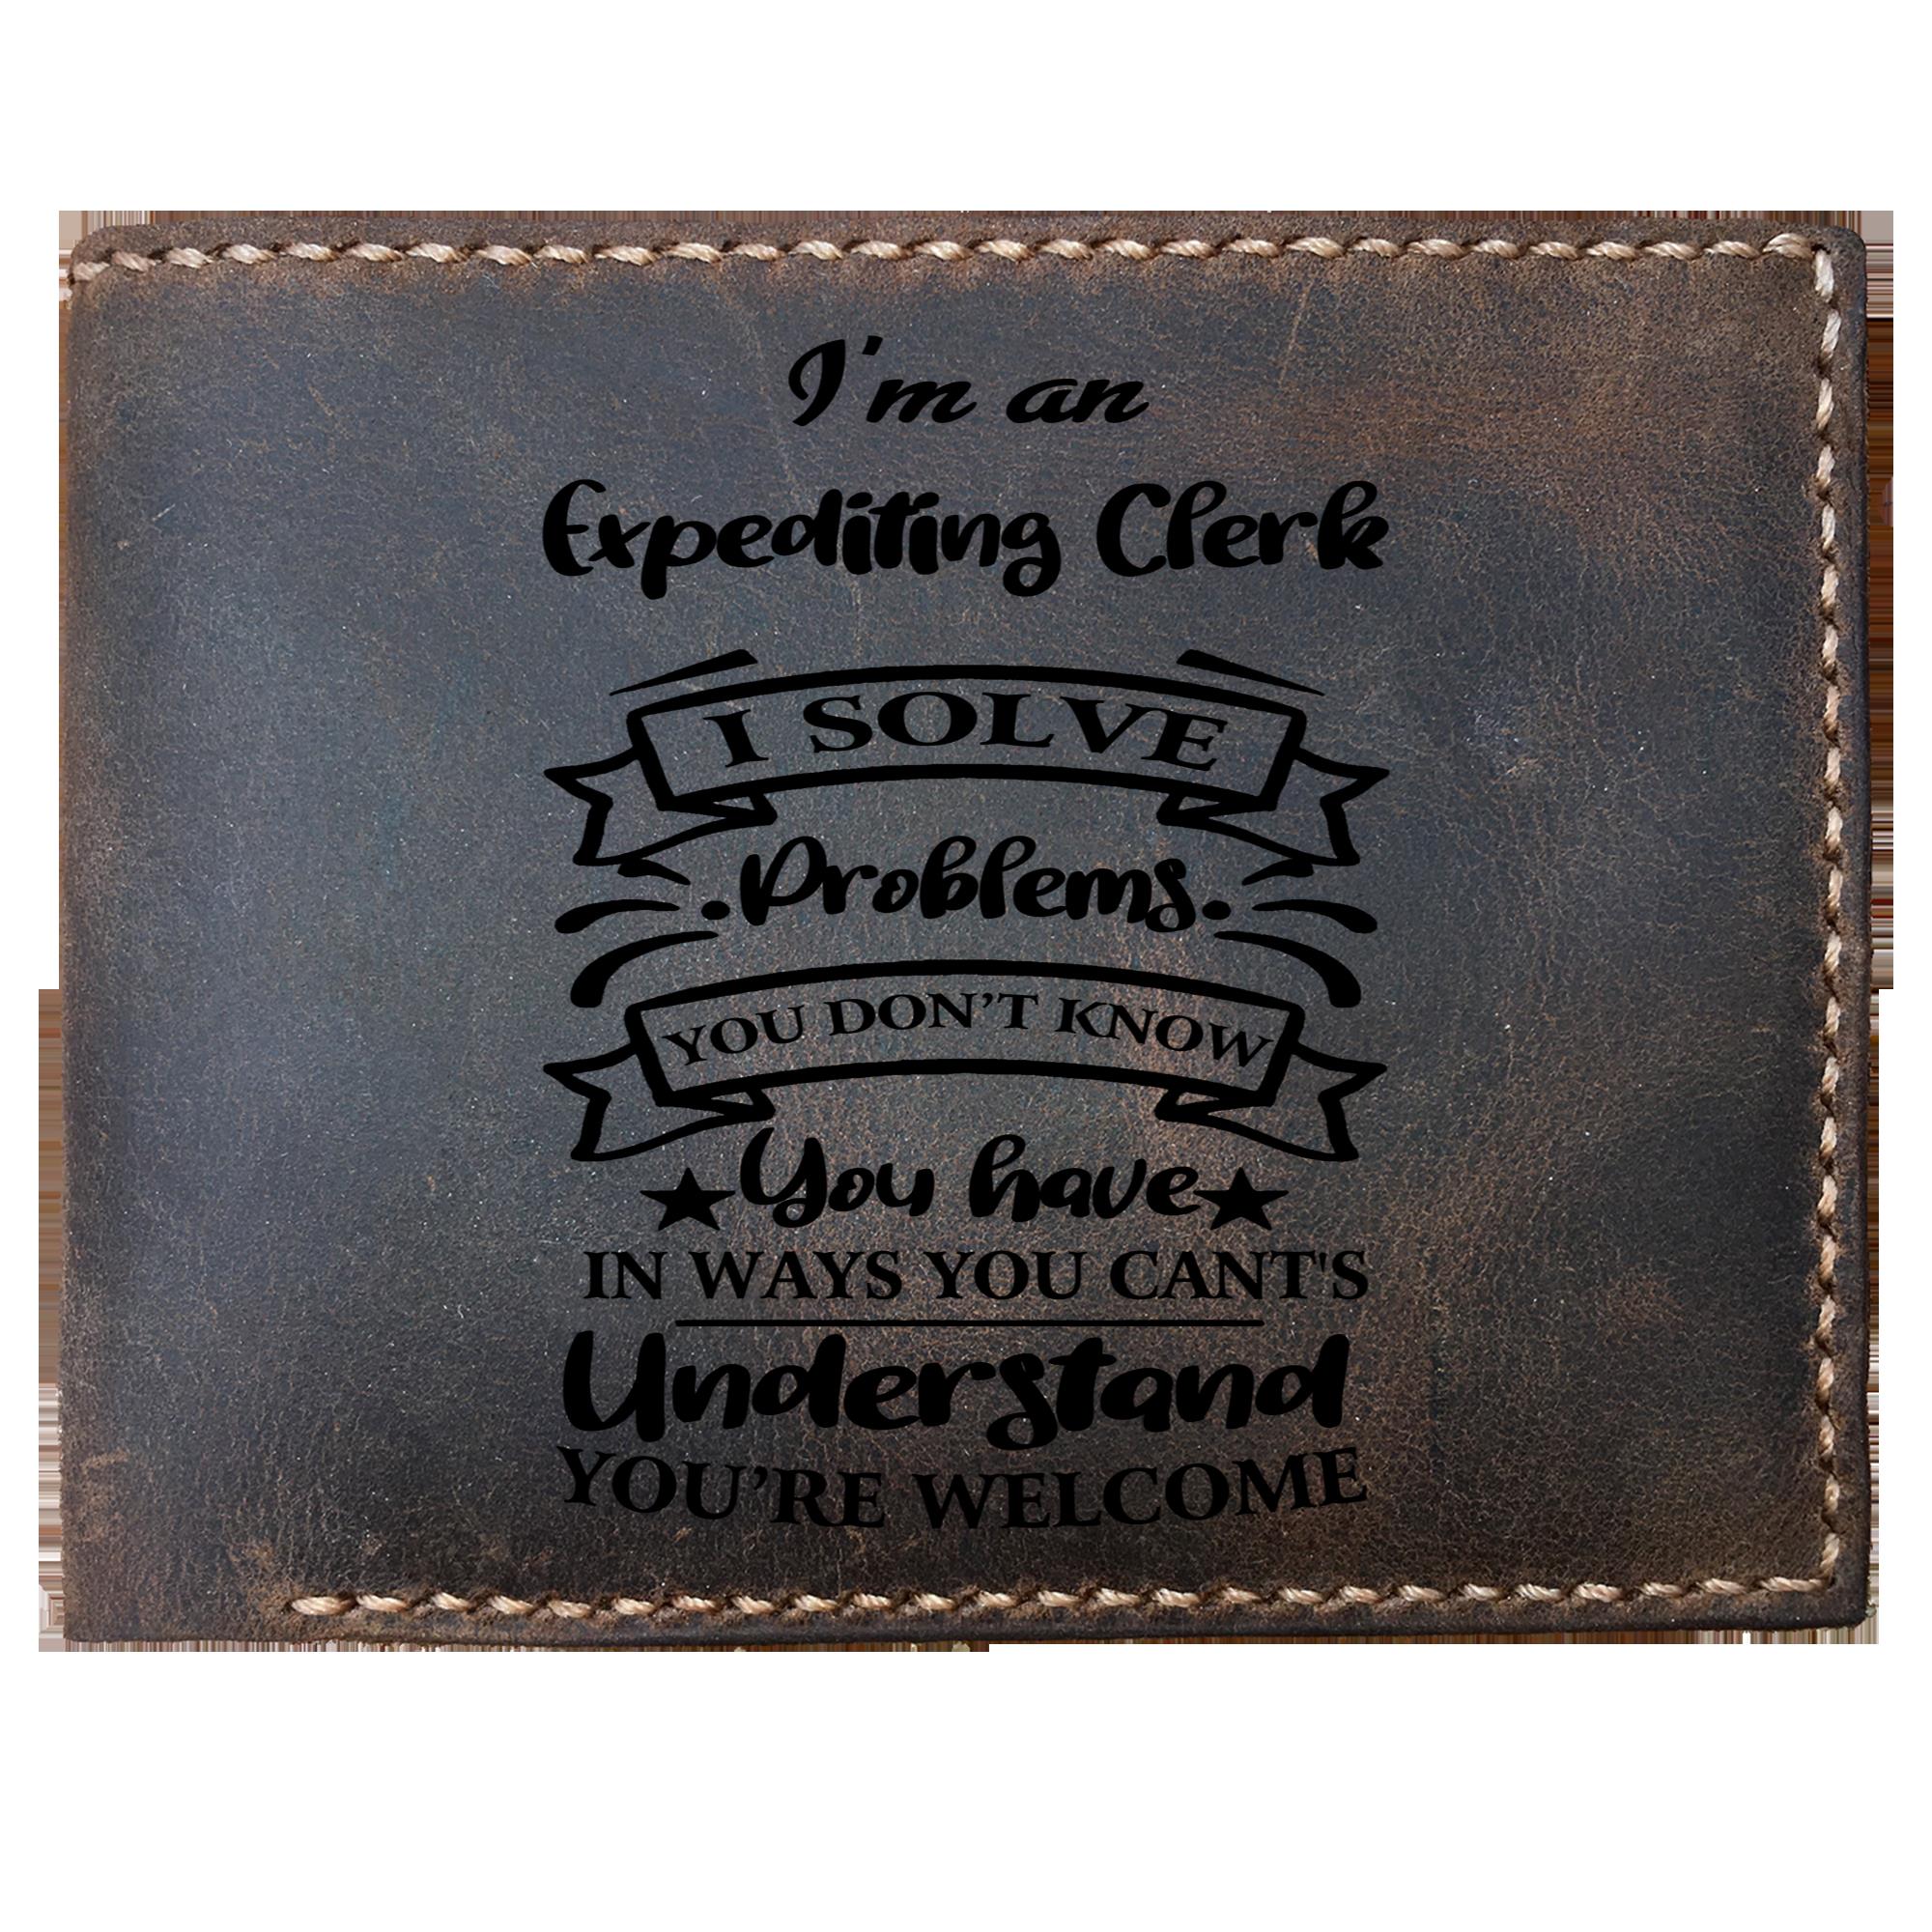 Skitongifts Funny Custom Laser Engraved Bifold Leather Wallet For Men, I'm an Expediting Clerk Solve Problems, Father's Day Gifts